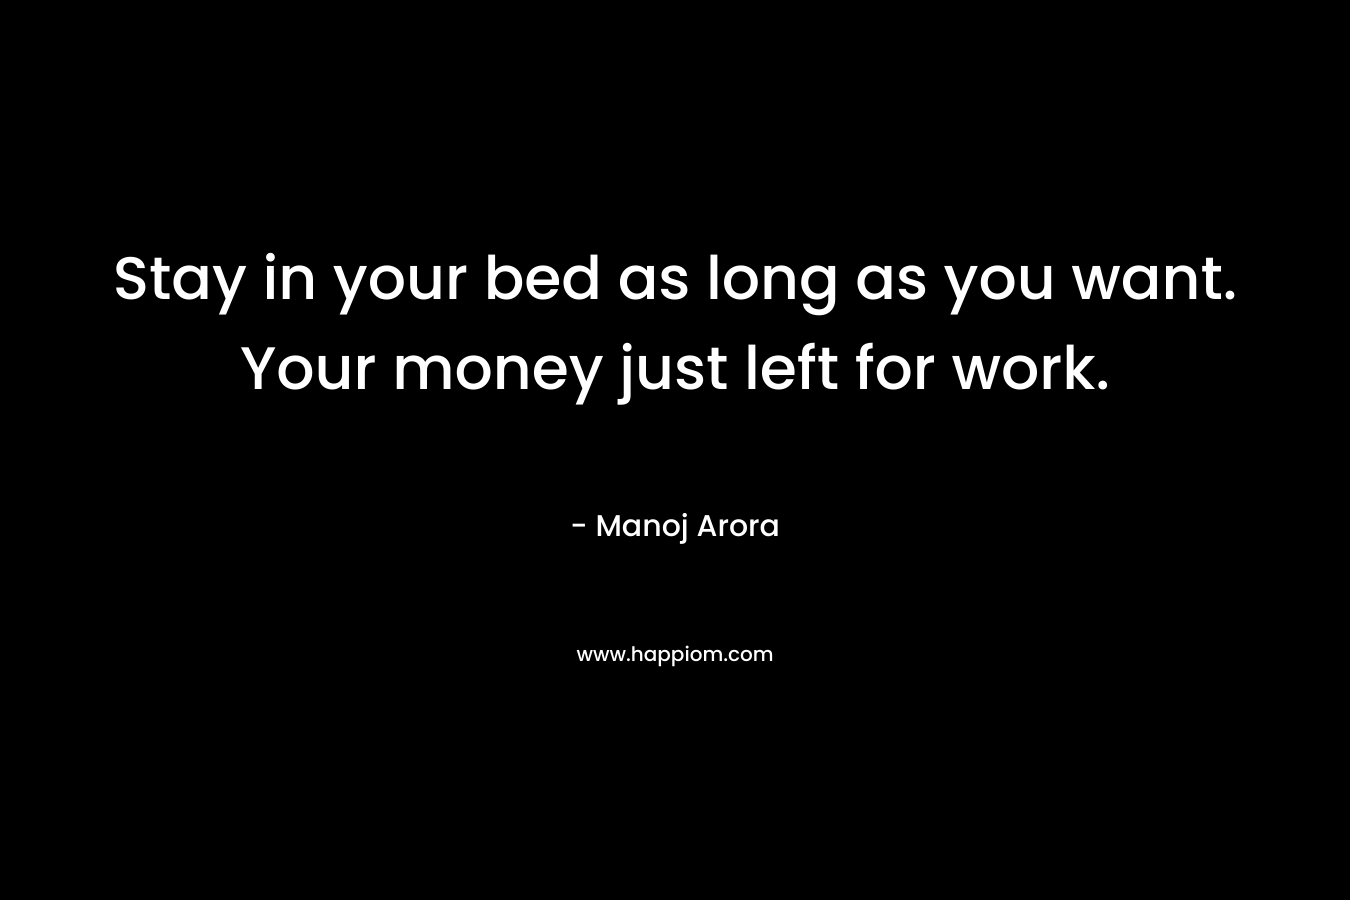 Stay in your bed as long as you want. Your money just left for work.